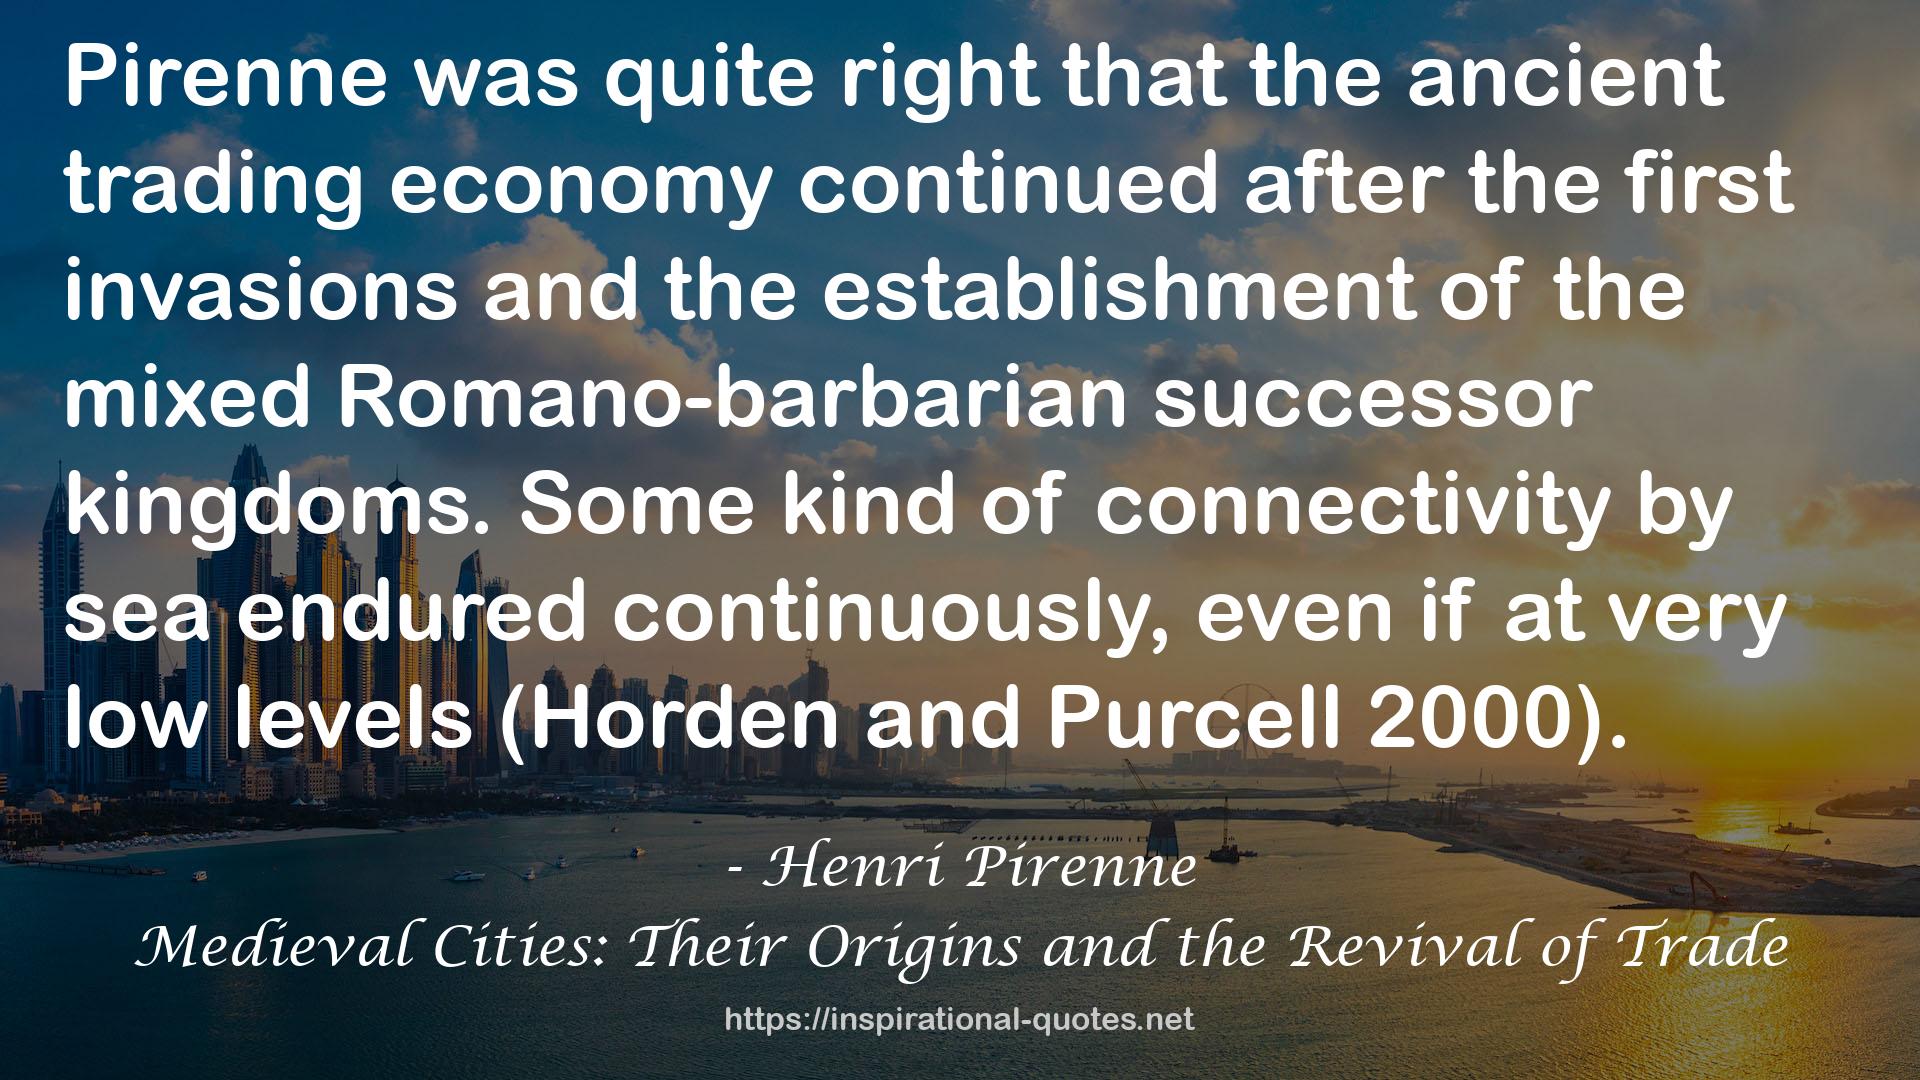 Medieval Cities: Their Origins and the Revival of Trade QUOTES